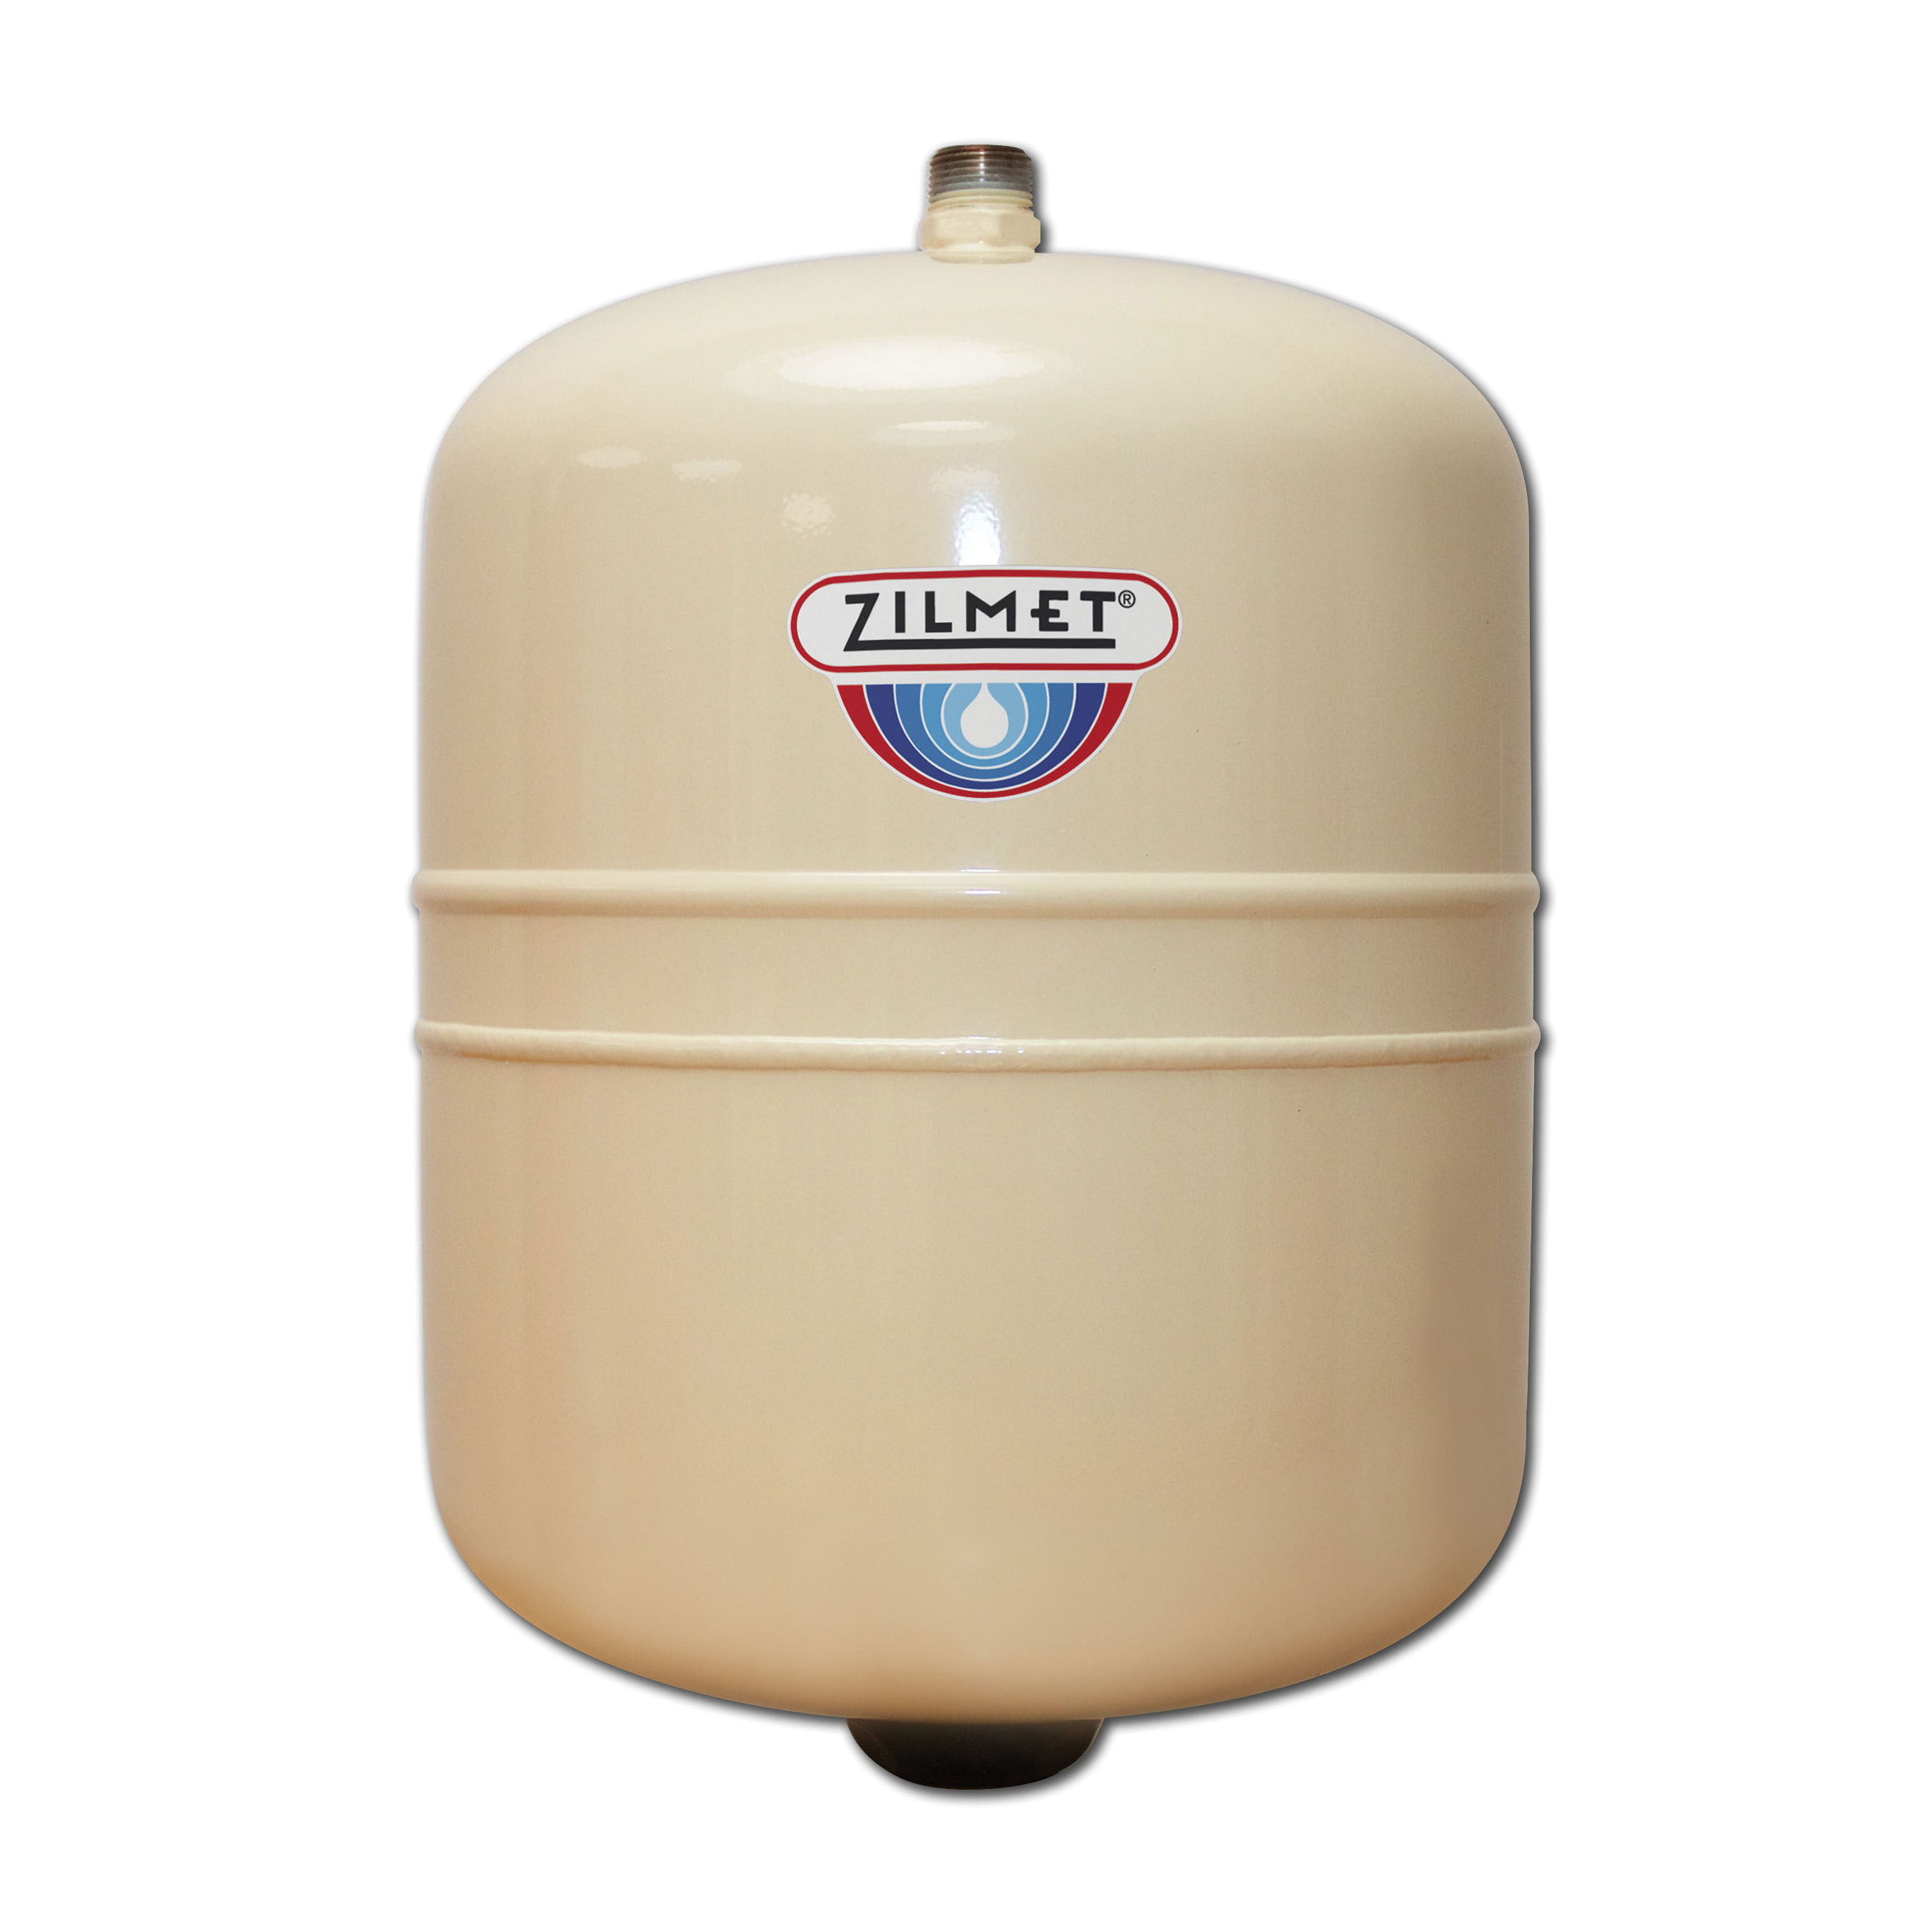 Zilmet® ZEP12 In-Line Thermal Expansion Tank, 4.8 gal Tank, 3.3 gal Acceptance, 150 psi, 10.6 in Dia x 13.7 in H